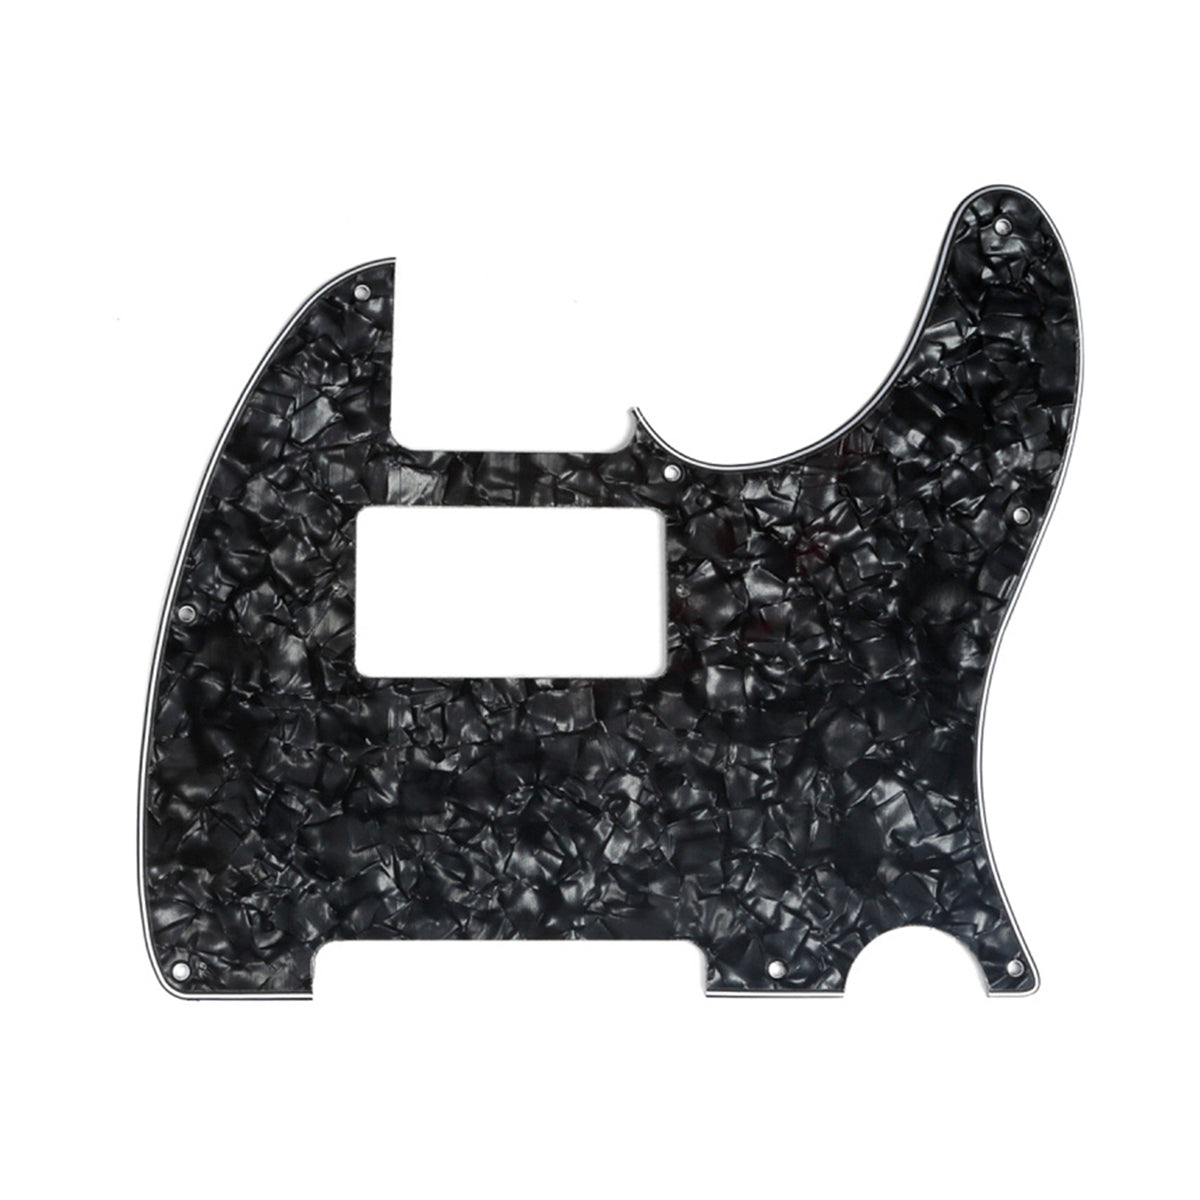 Musiclily 8 Hole Guitar Tele Pickguard Humbucker HH for USA/Mexican Made Fender Standard Telecaster Modern Style,4Ply Black Pearl